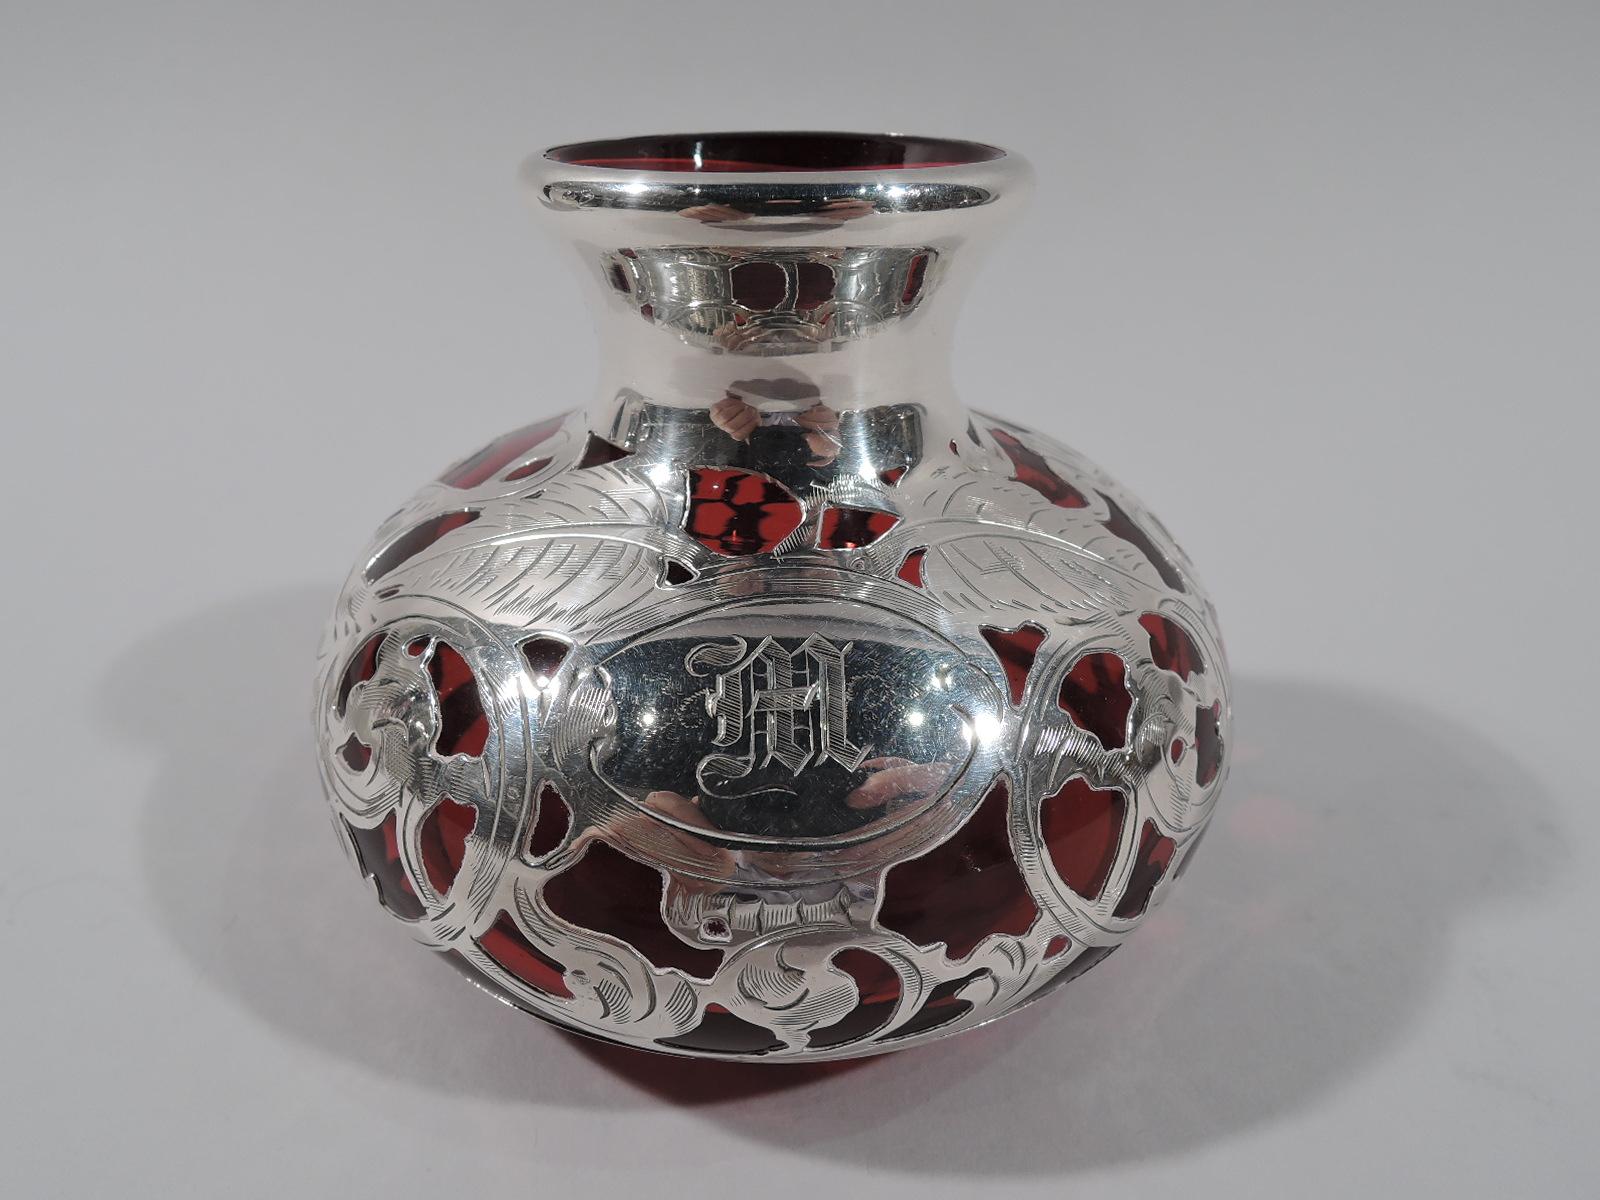 Lovely turn-of-the-century red glass bud vase with engraved silver overlay. Made by La Pierre in New York. Bellied bowl with short neck and flared rim. Dense overlay in form of rinceaux with leaves and flowerheads. Oval frame engraved with shaded